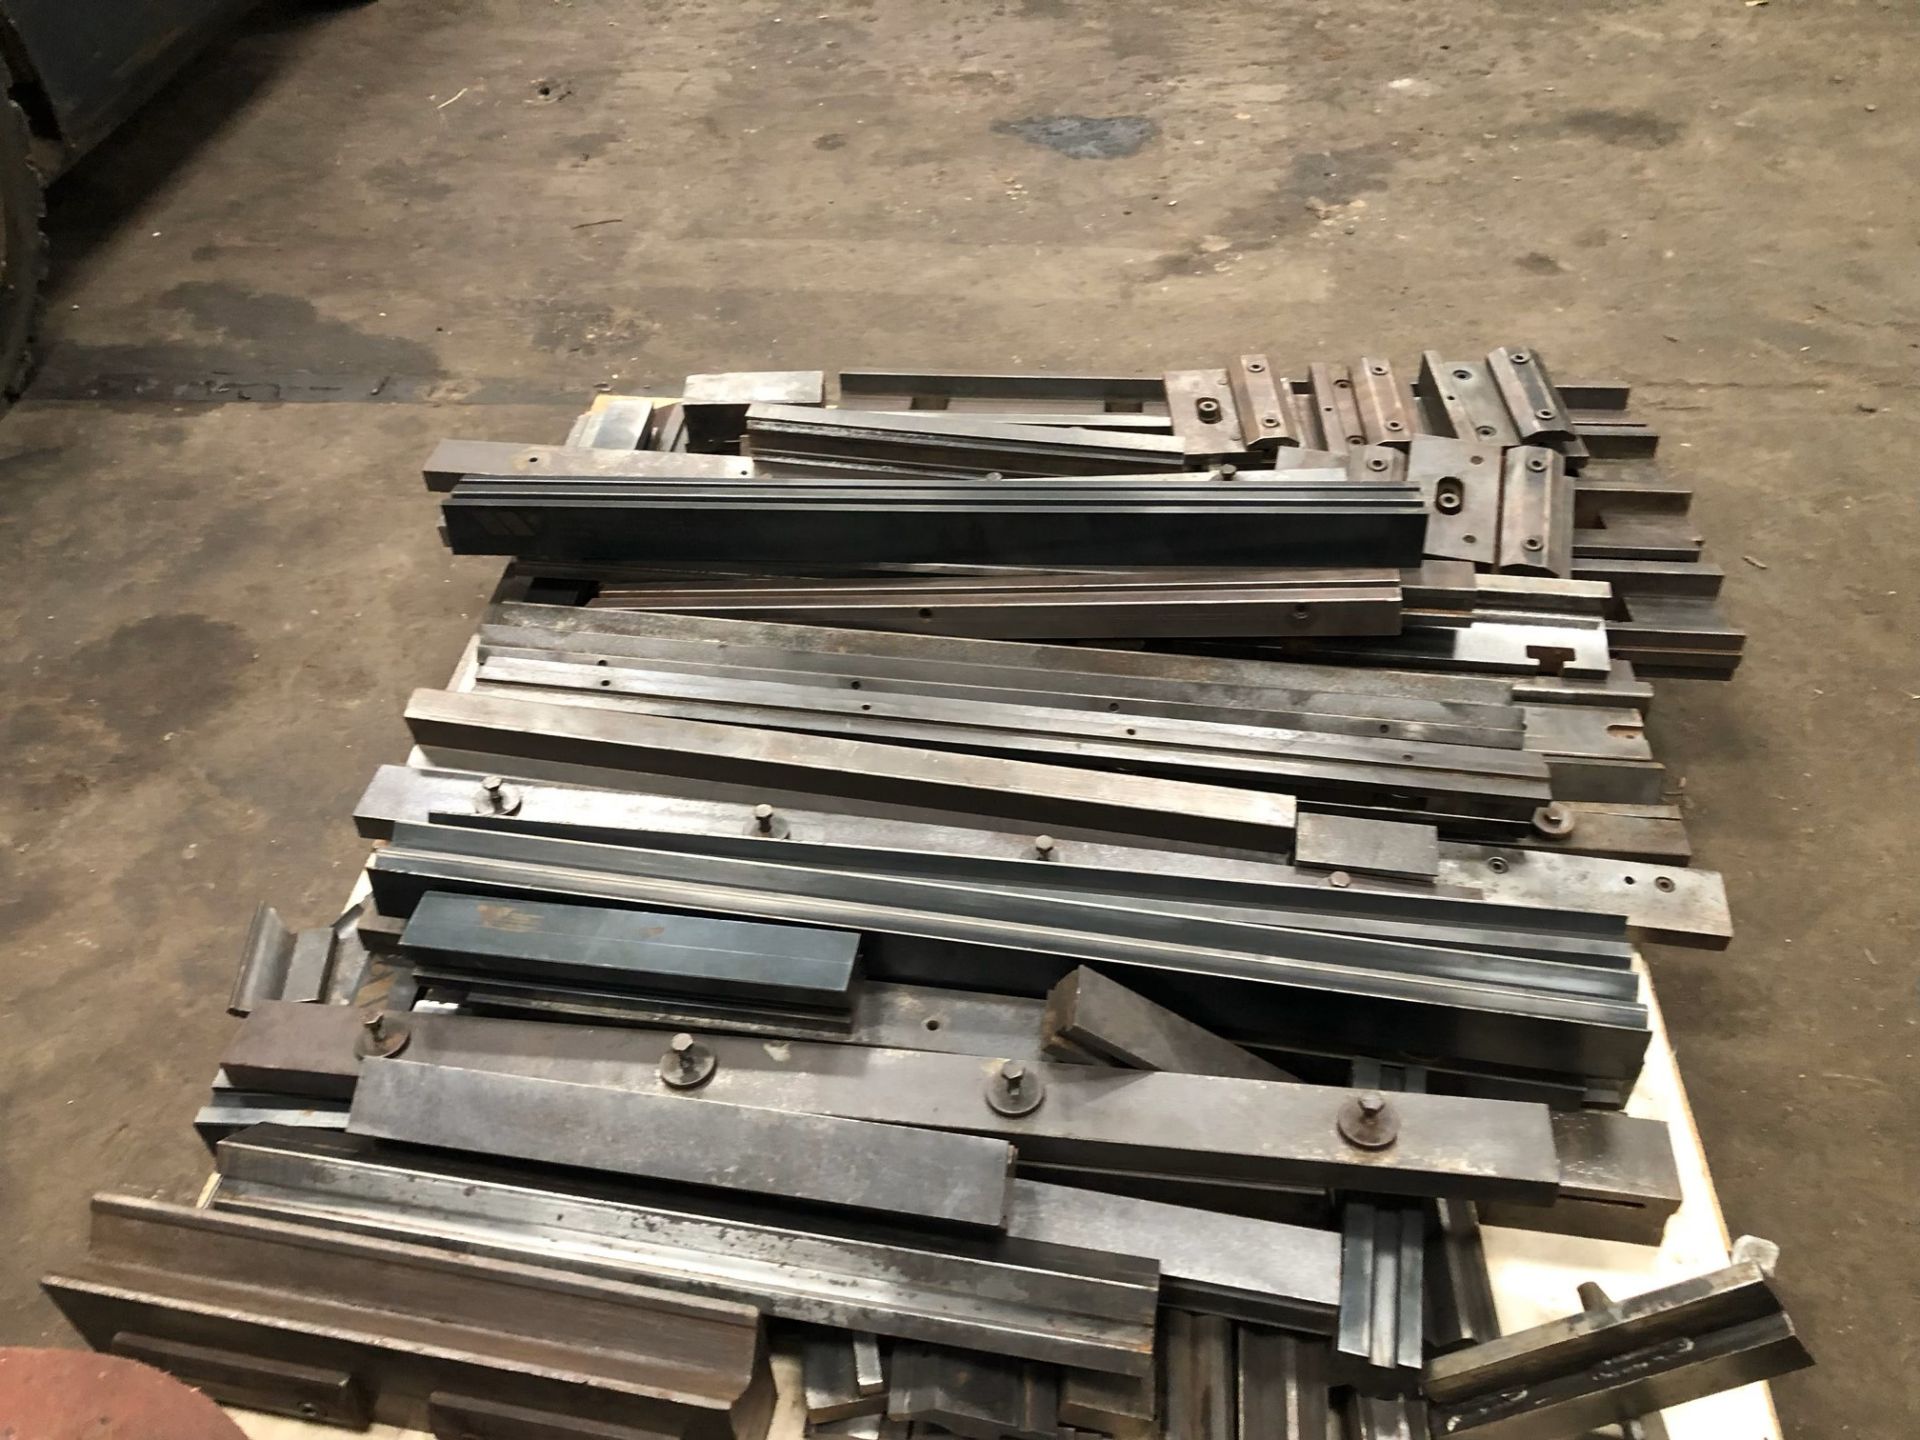 LOT OF PRESS BRAKE DIES, AMADA (Located at: Pitts by JJ, 3426 Hopper Road, Houston, TX 77093) - Image 3 of 5